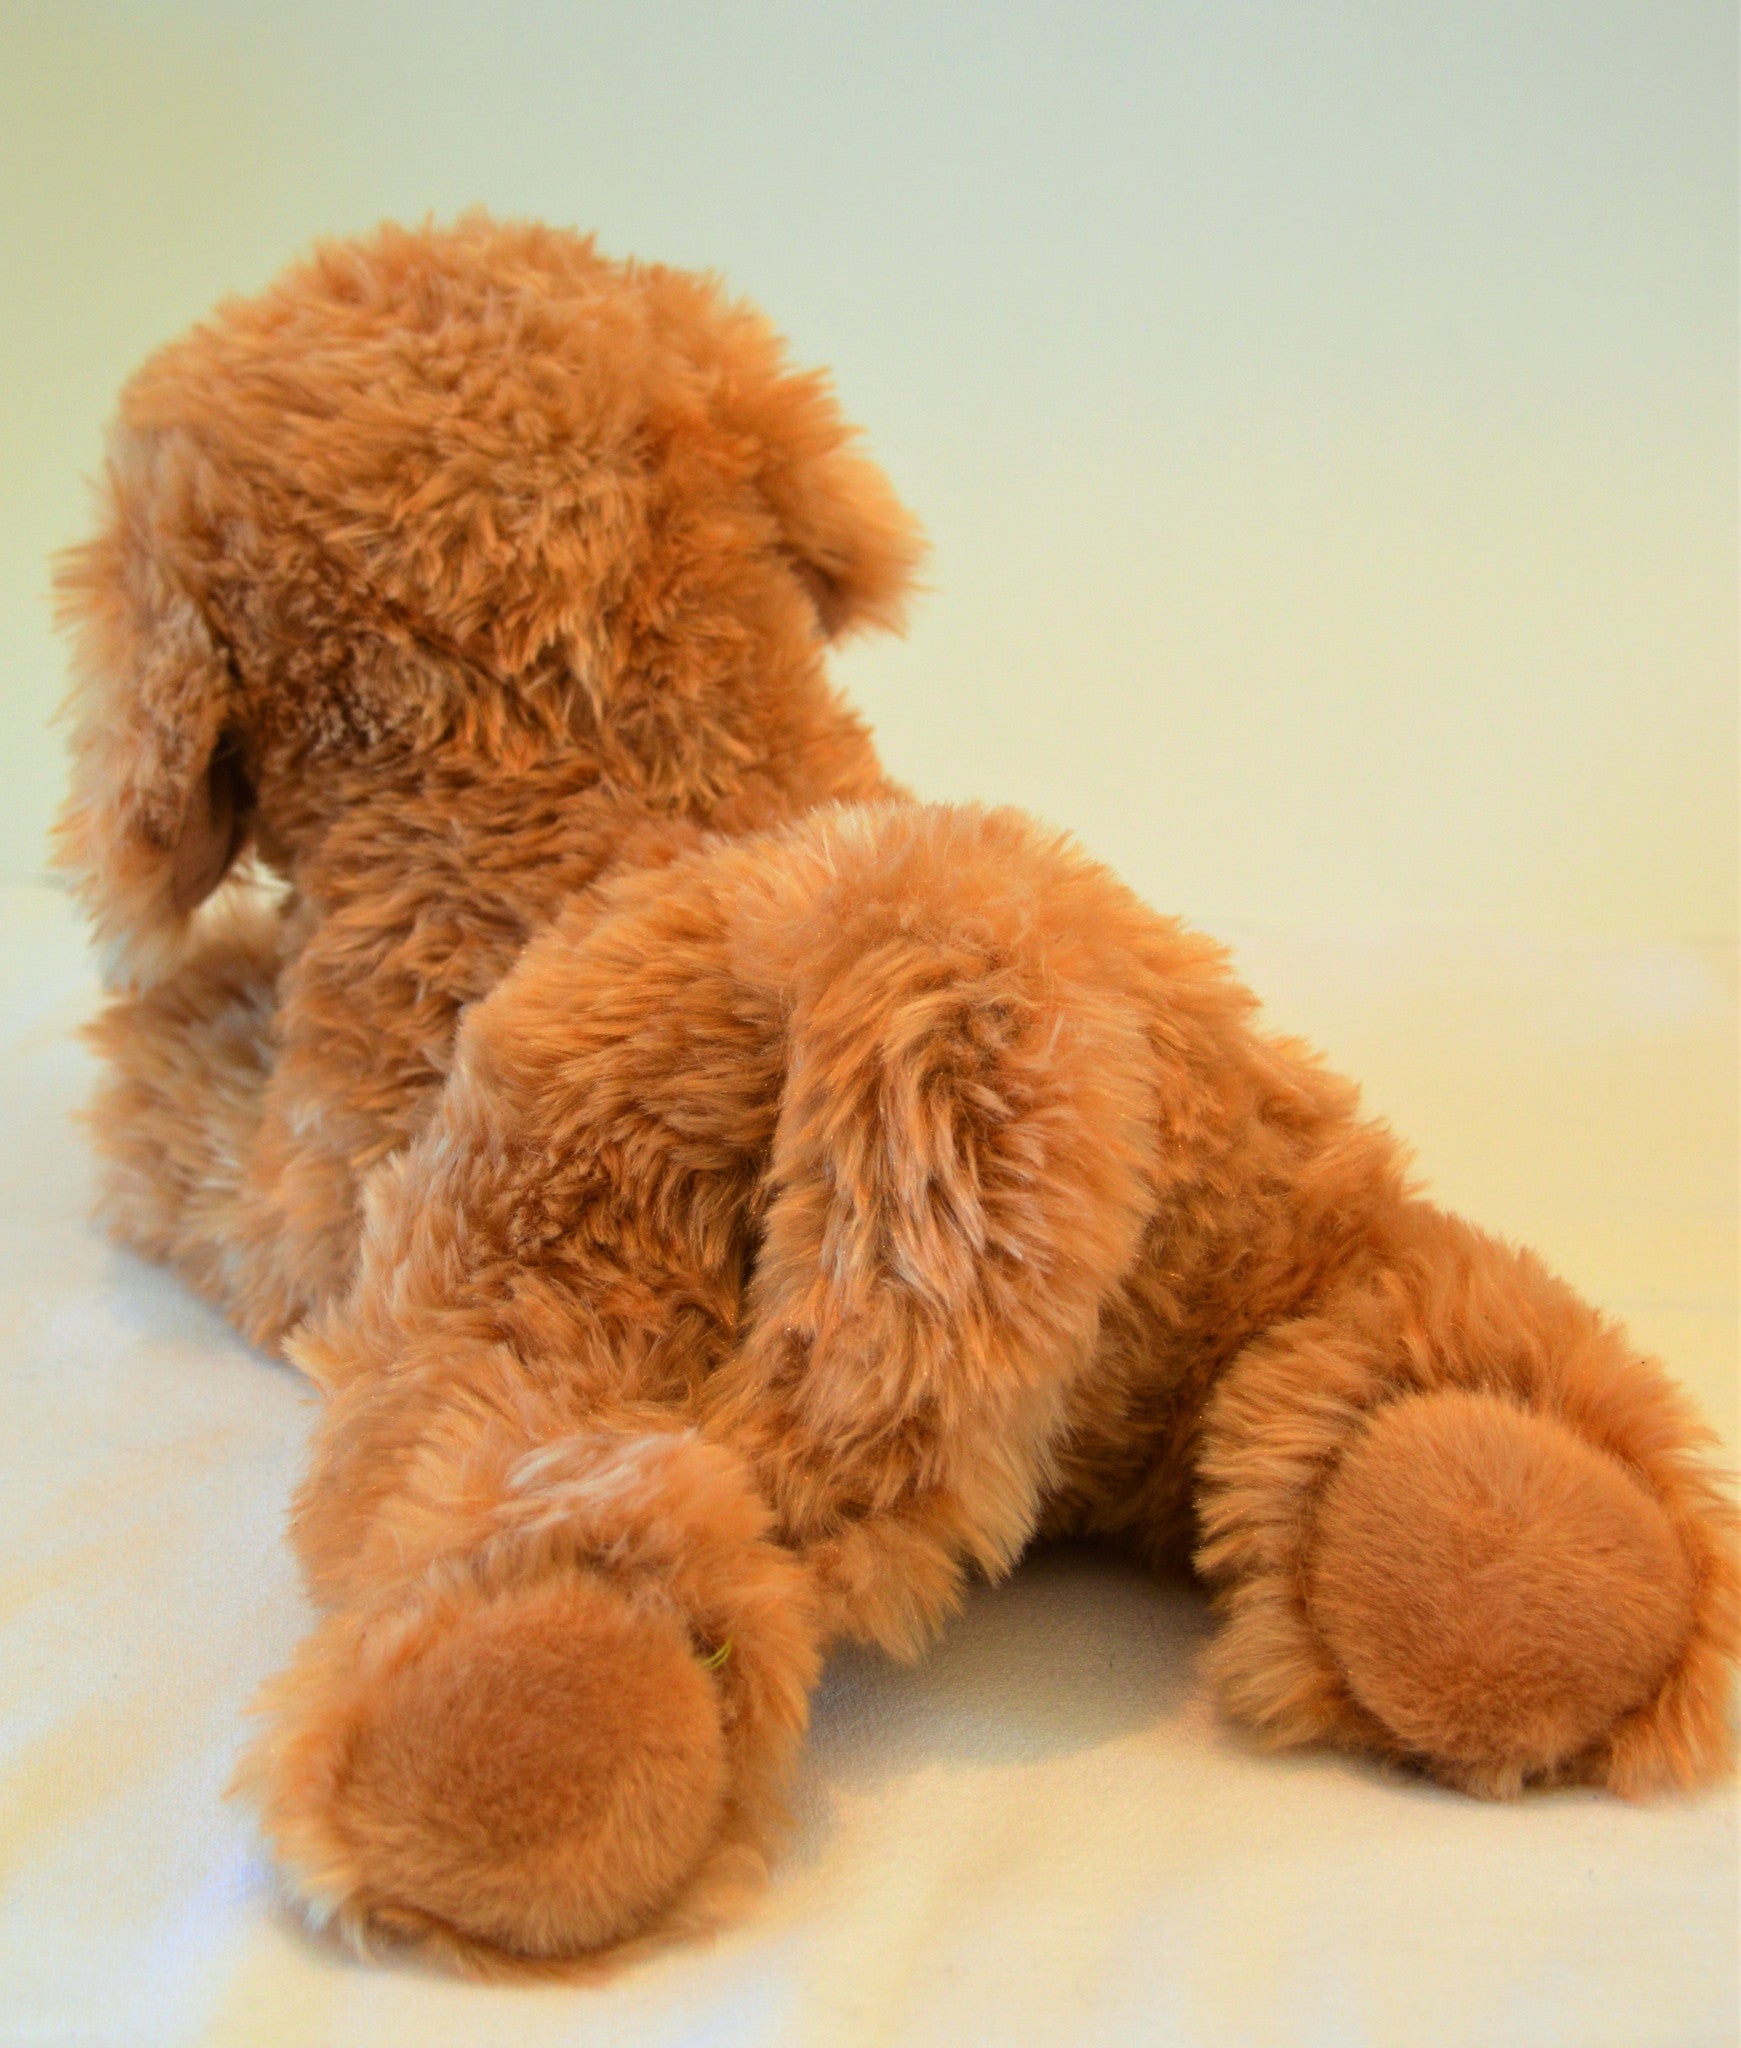 goldendoodle stuffed toy